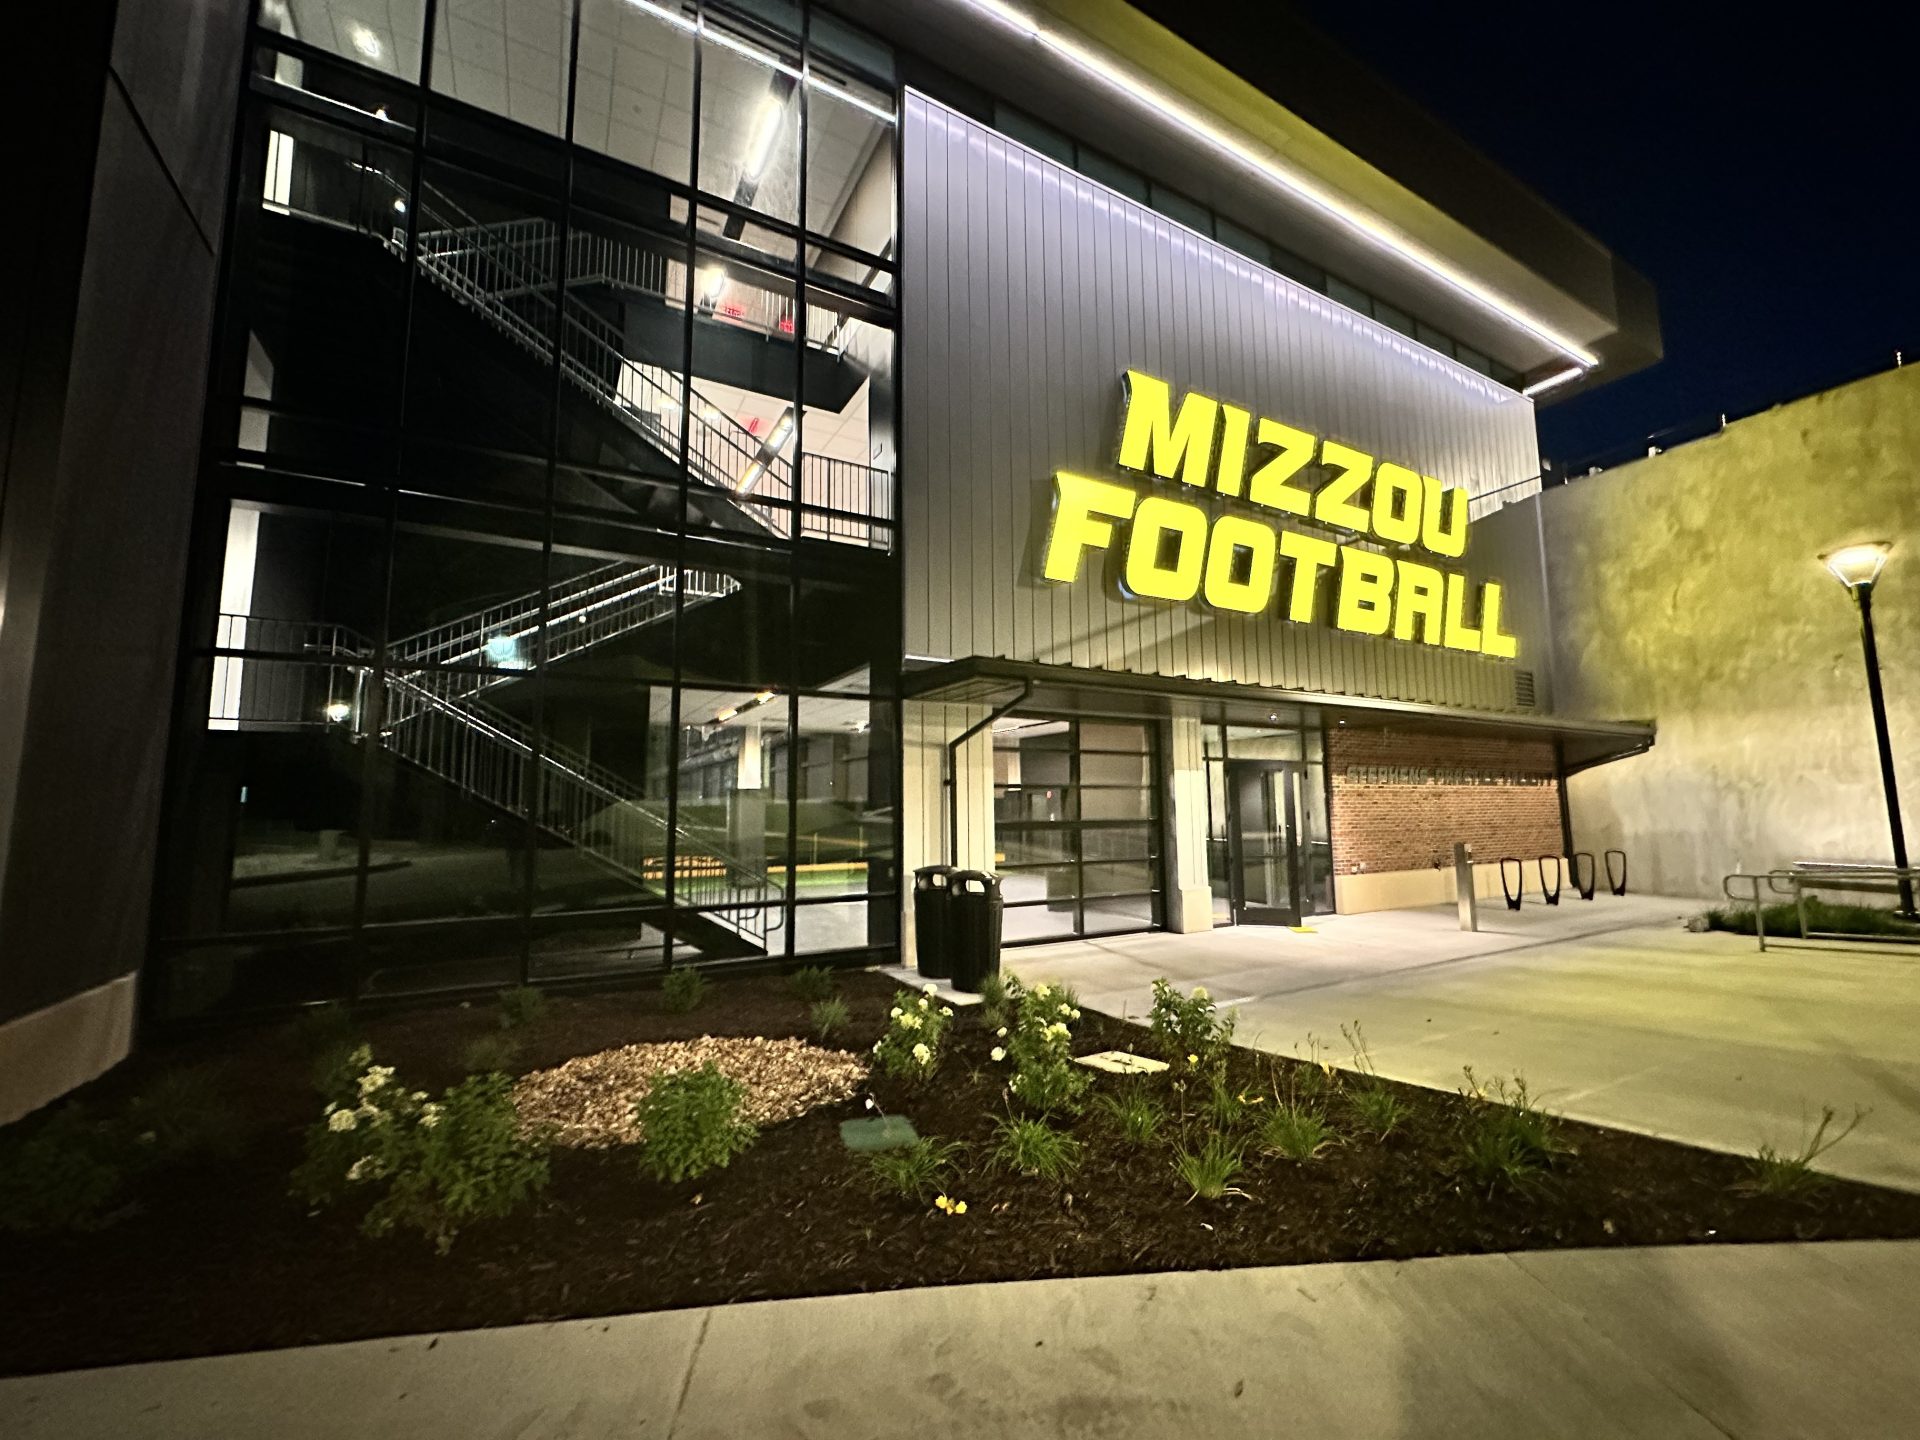 Memorial Stadium and other Mizzou athletic facilities to be toured by UM Curators